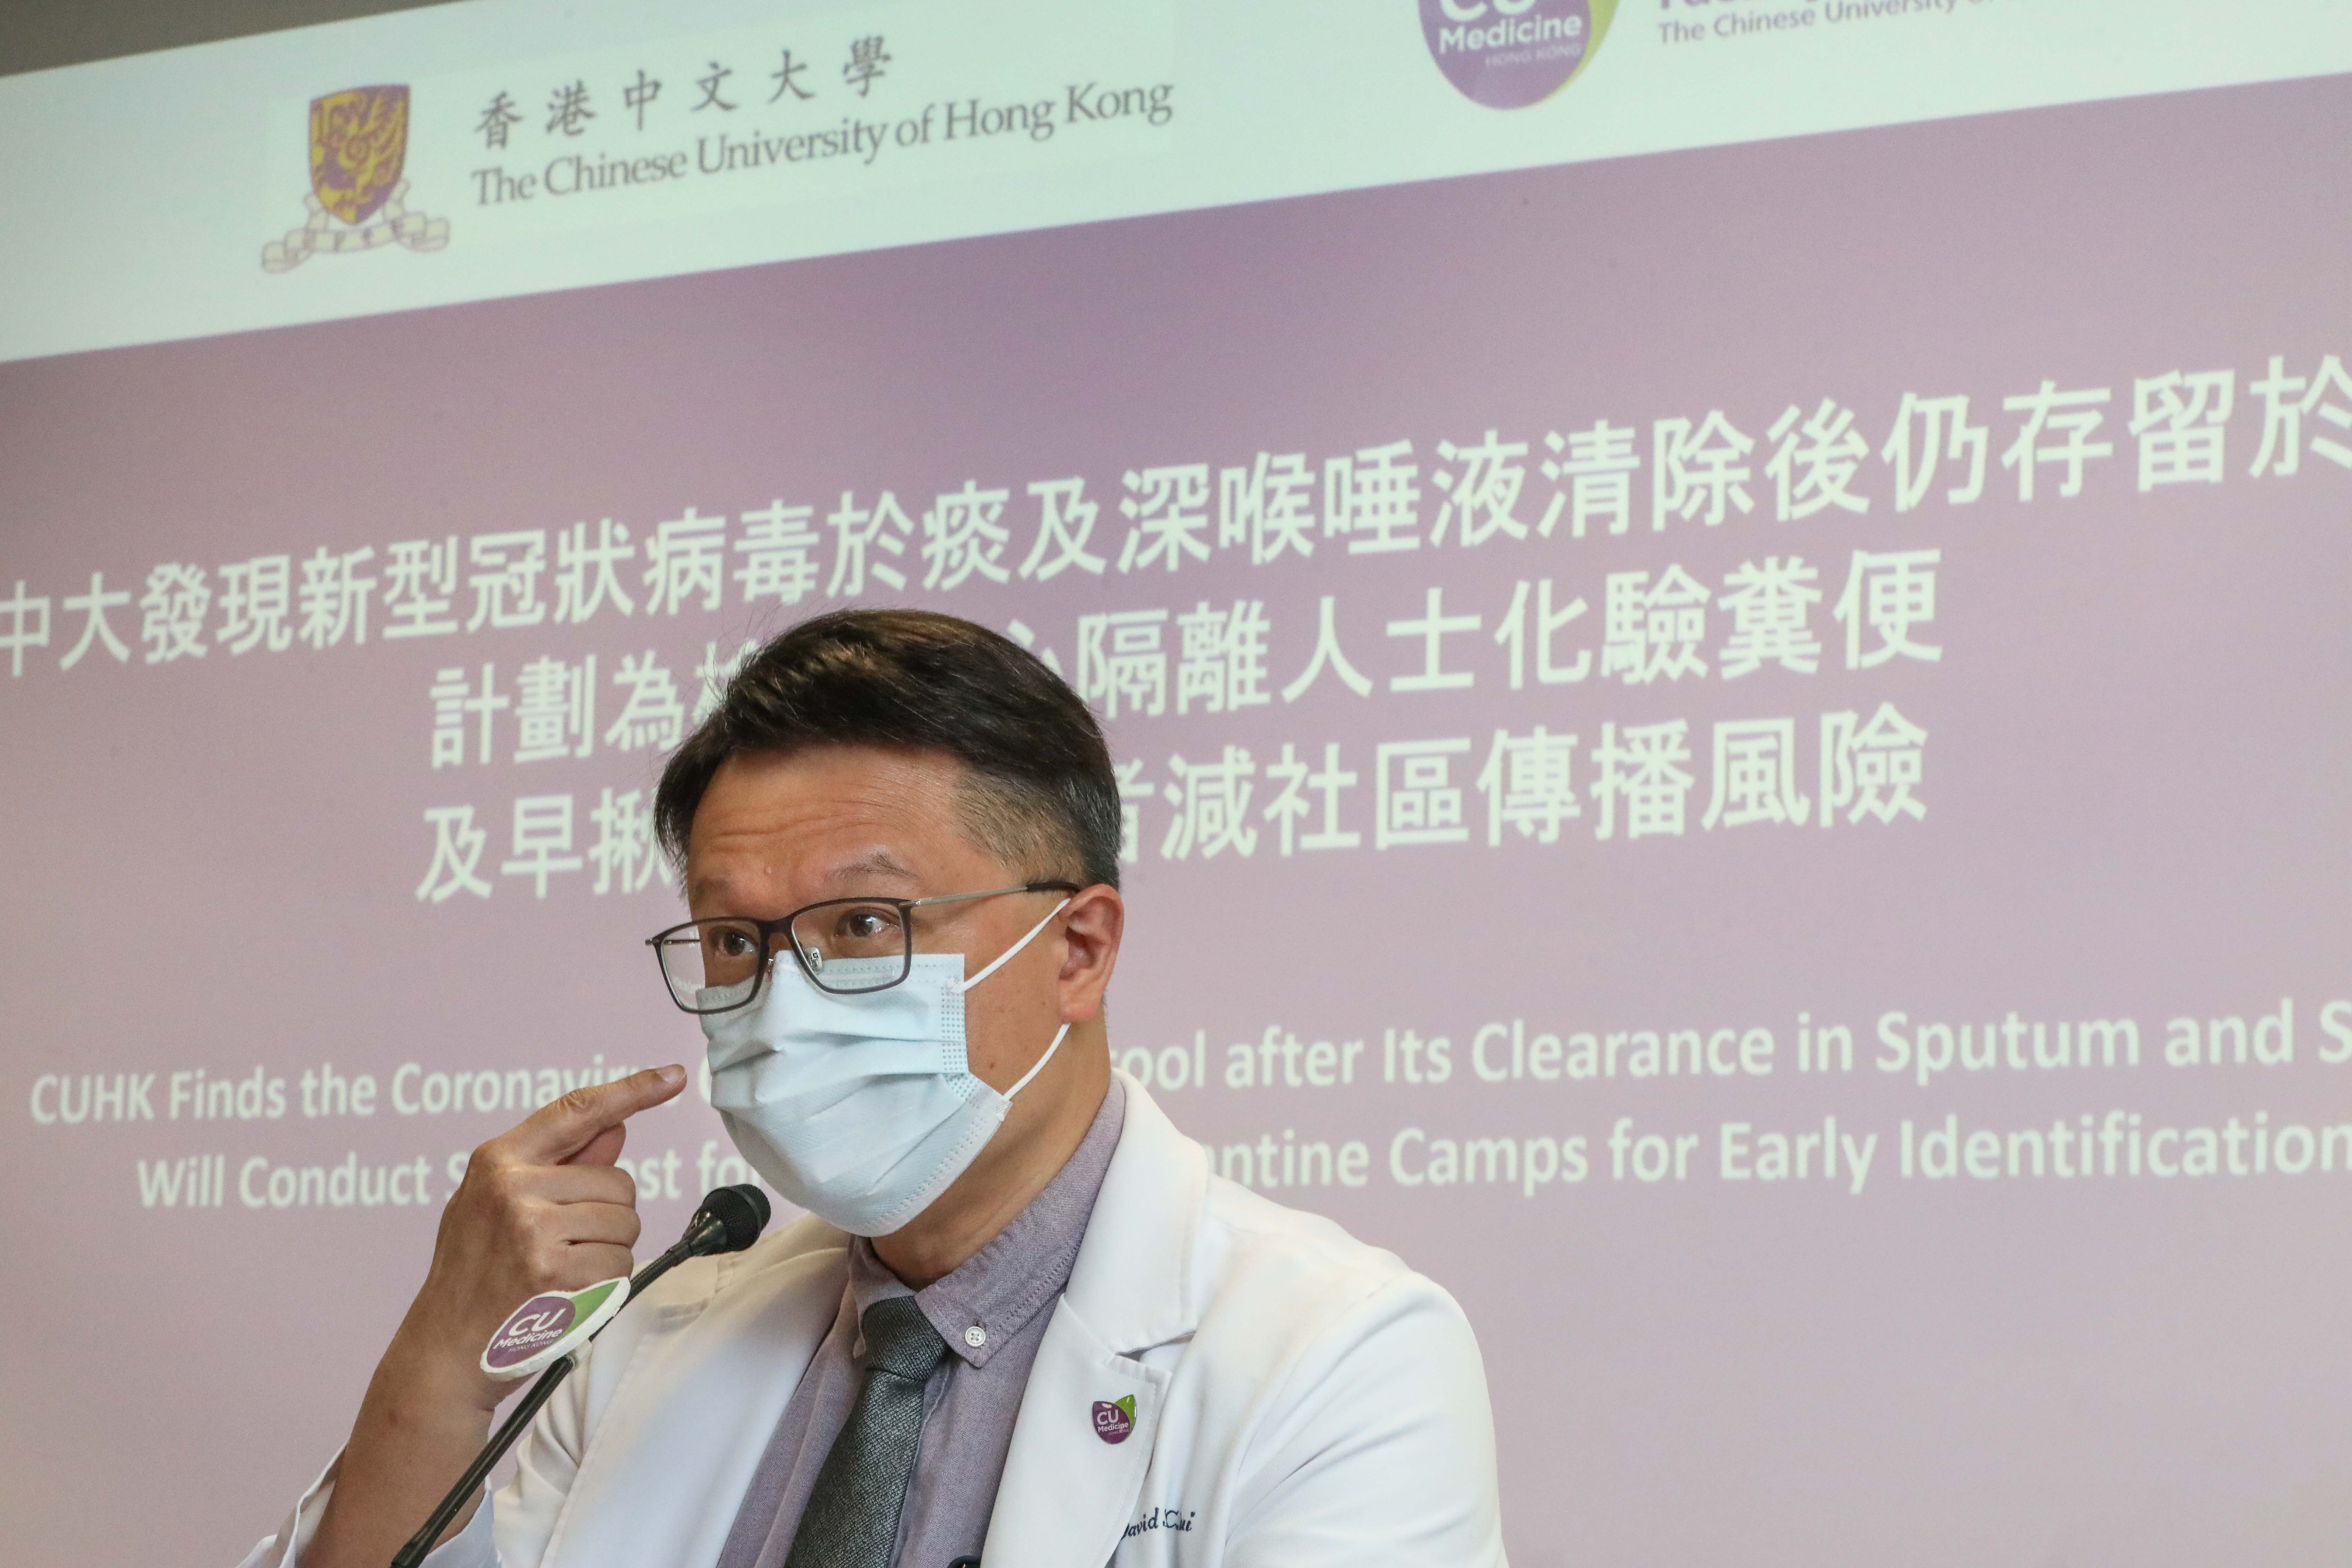 Prof. David HUI explains that coronavirus shedding in stool can contaminate the environment and the virus can be transmitted through mucosal surfaces of eyes, nose and mouth after people touch the contaminated surface.